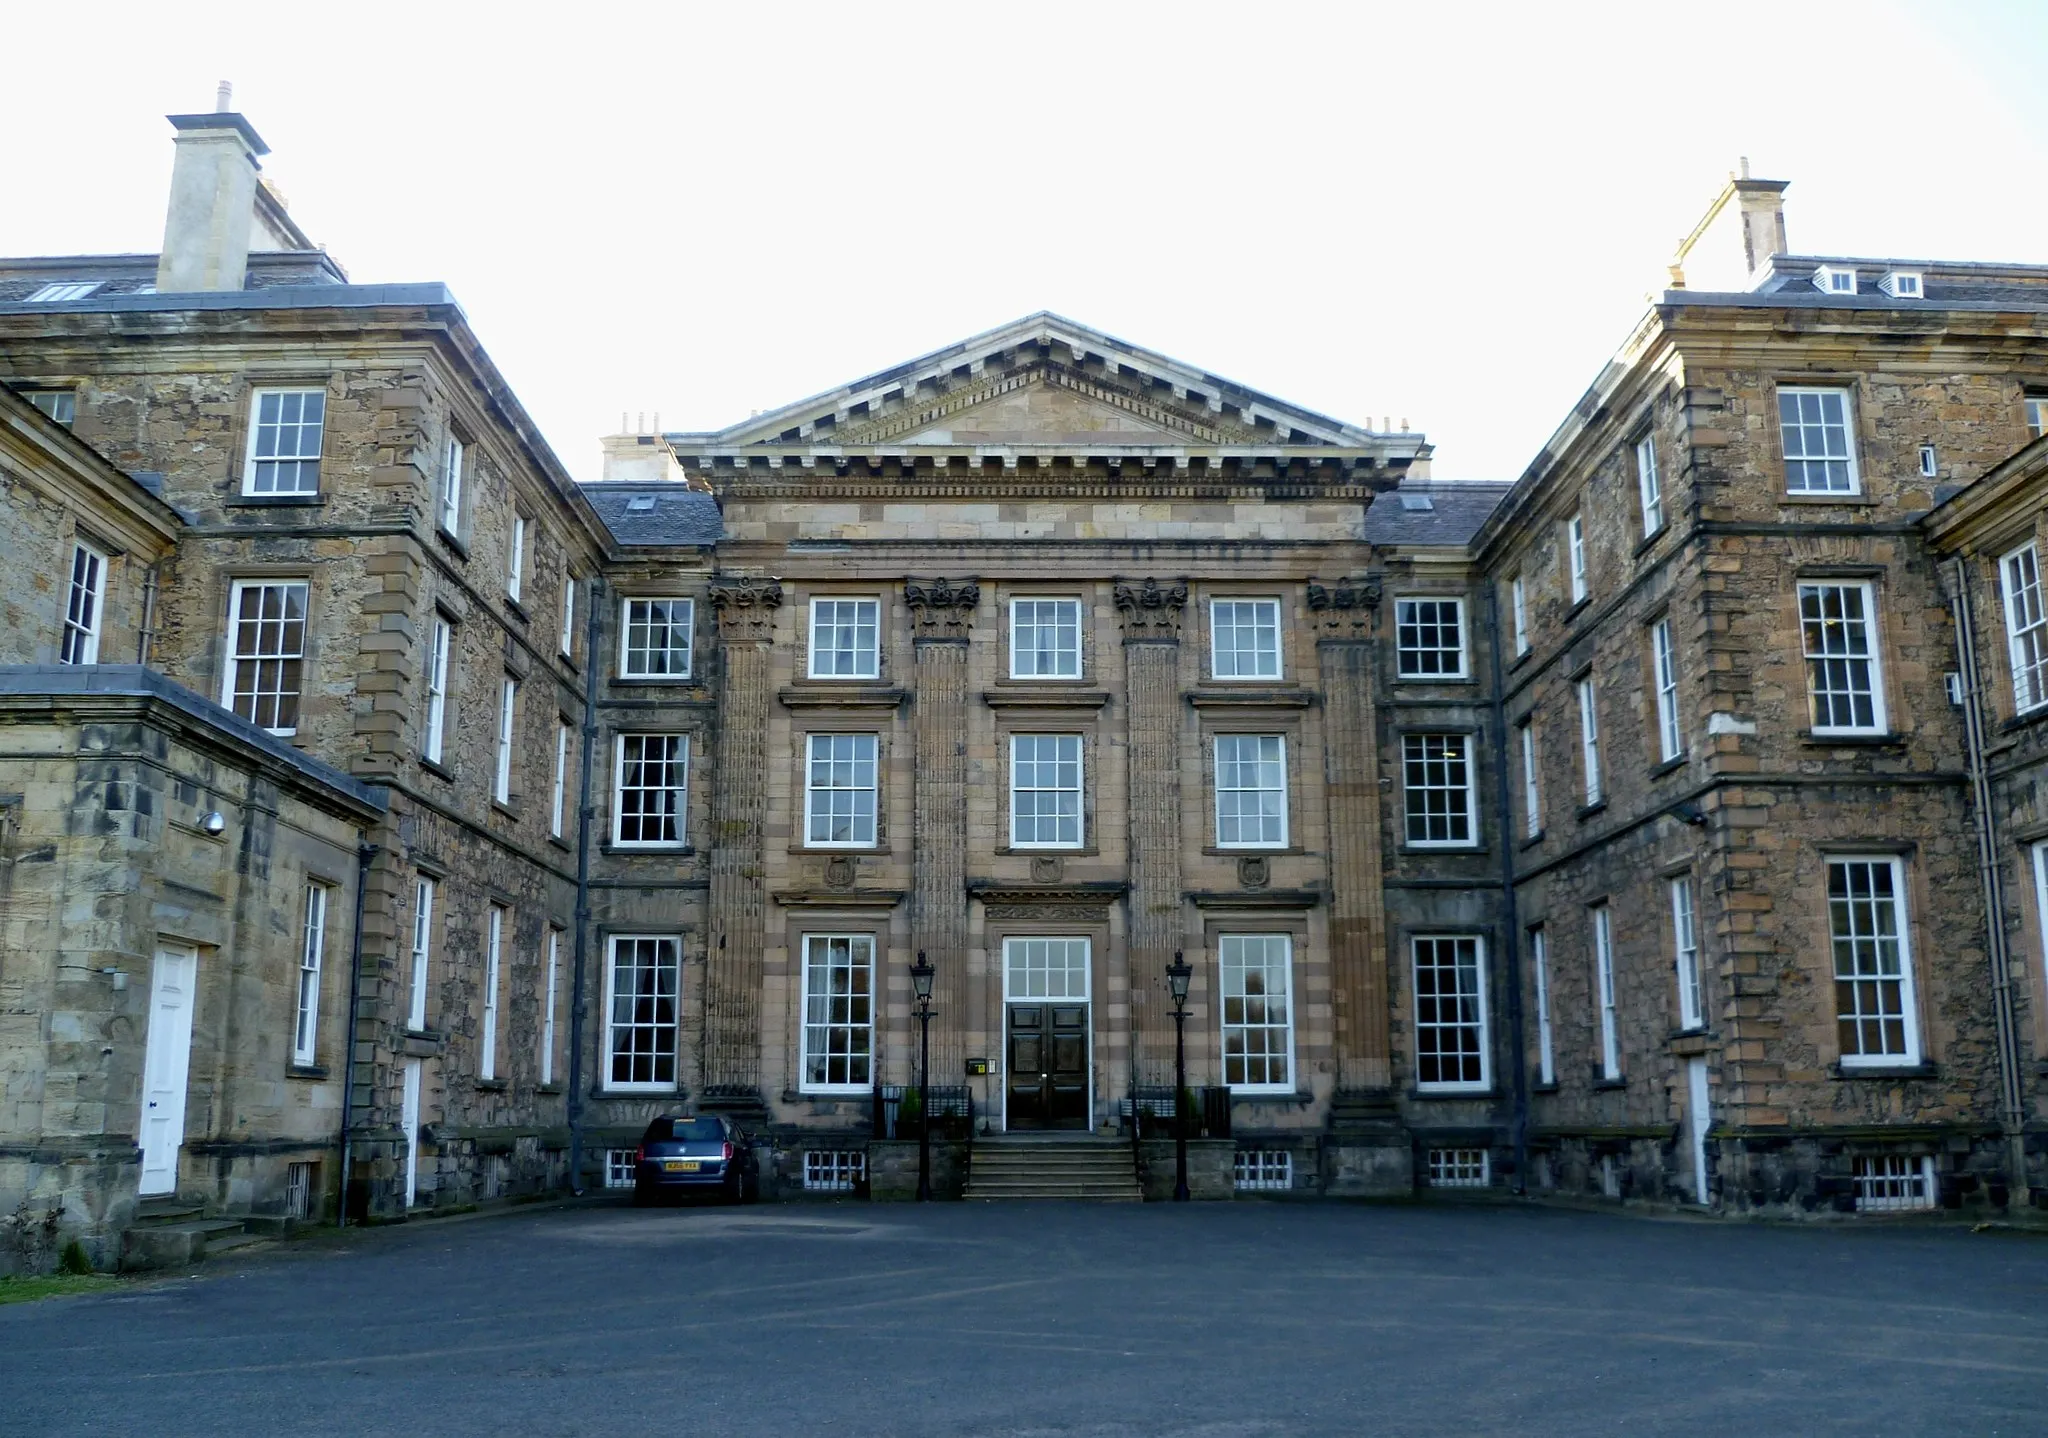 Photo showing: Frontage of Dalkeith Palace, now styling itself more modestly as Dalkeith House. The building is the work of several architects including additions by Vanbrugh. The main portion was built between 1702 and 1711. It is now the Scottish Campus of the University of Wisconsin